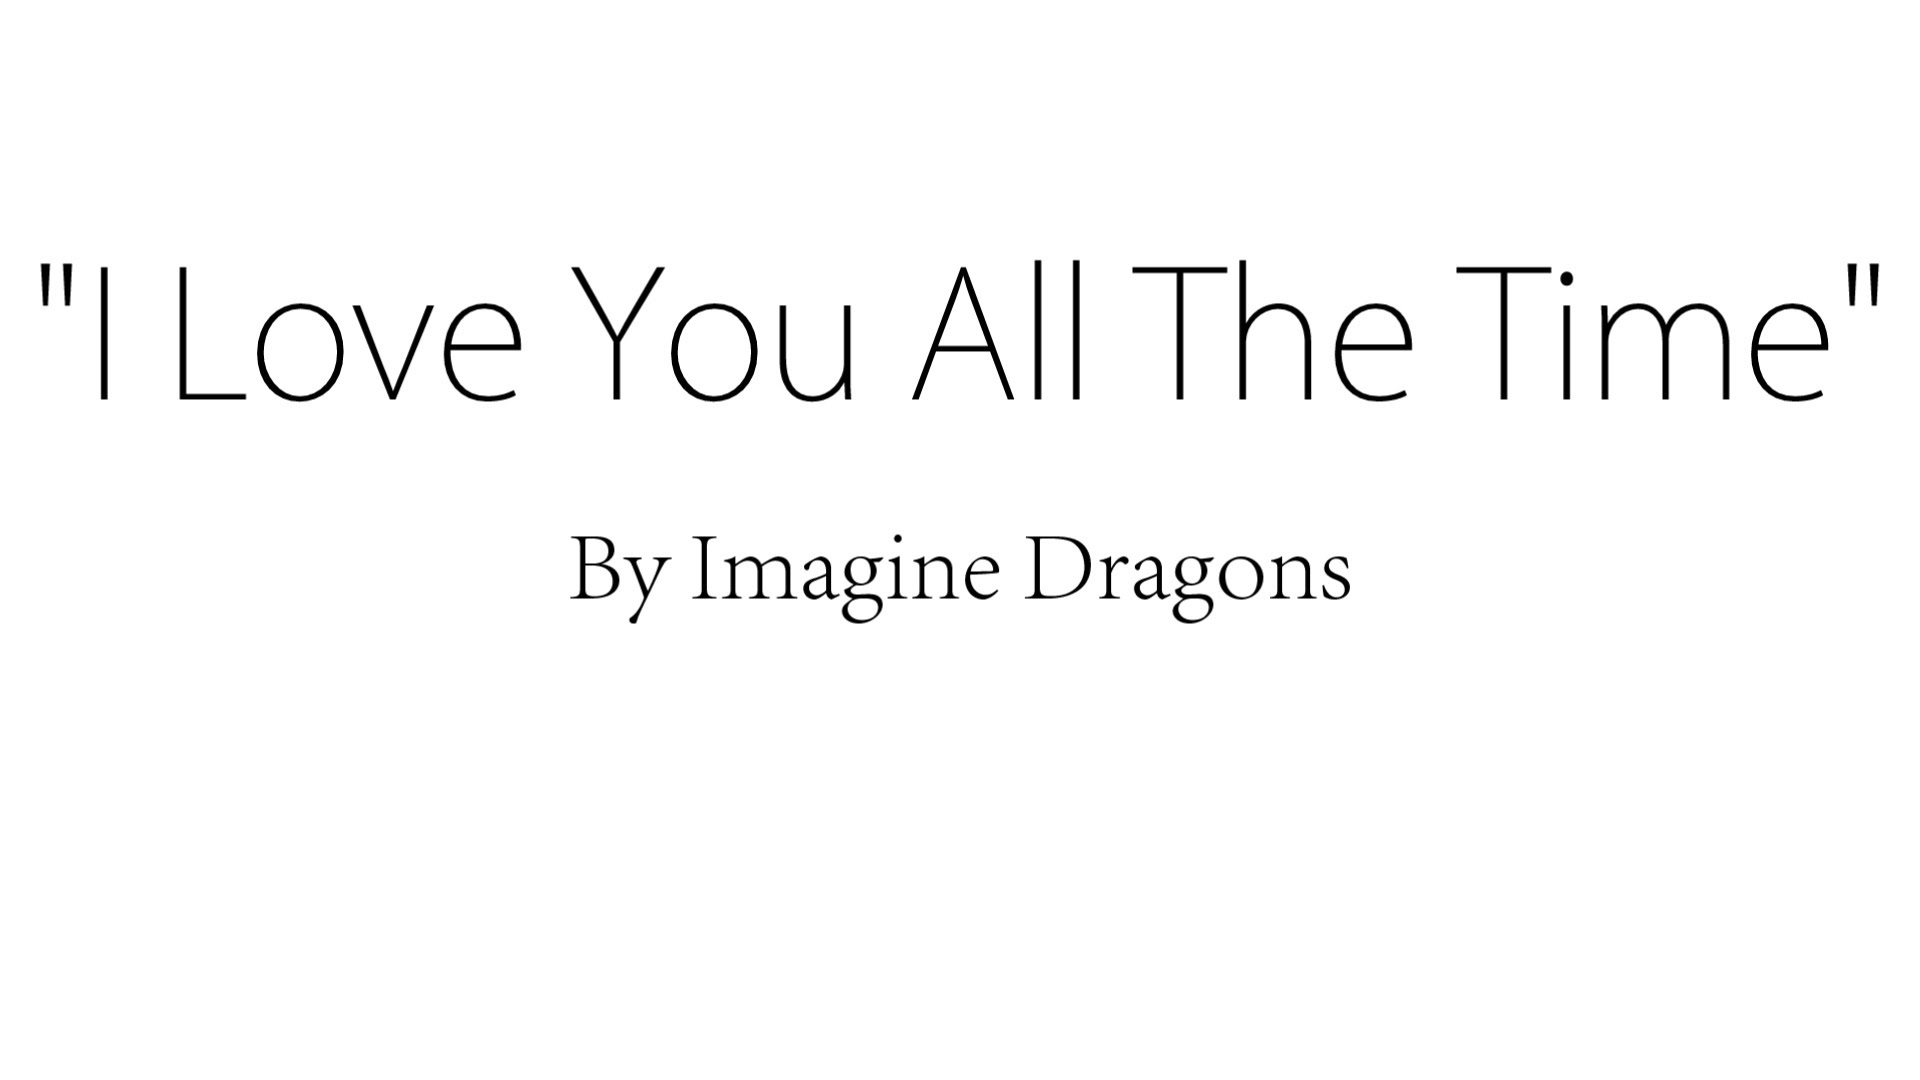 Imagine Dragons - I Love You All The Time